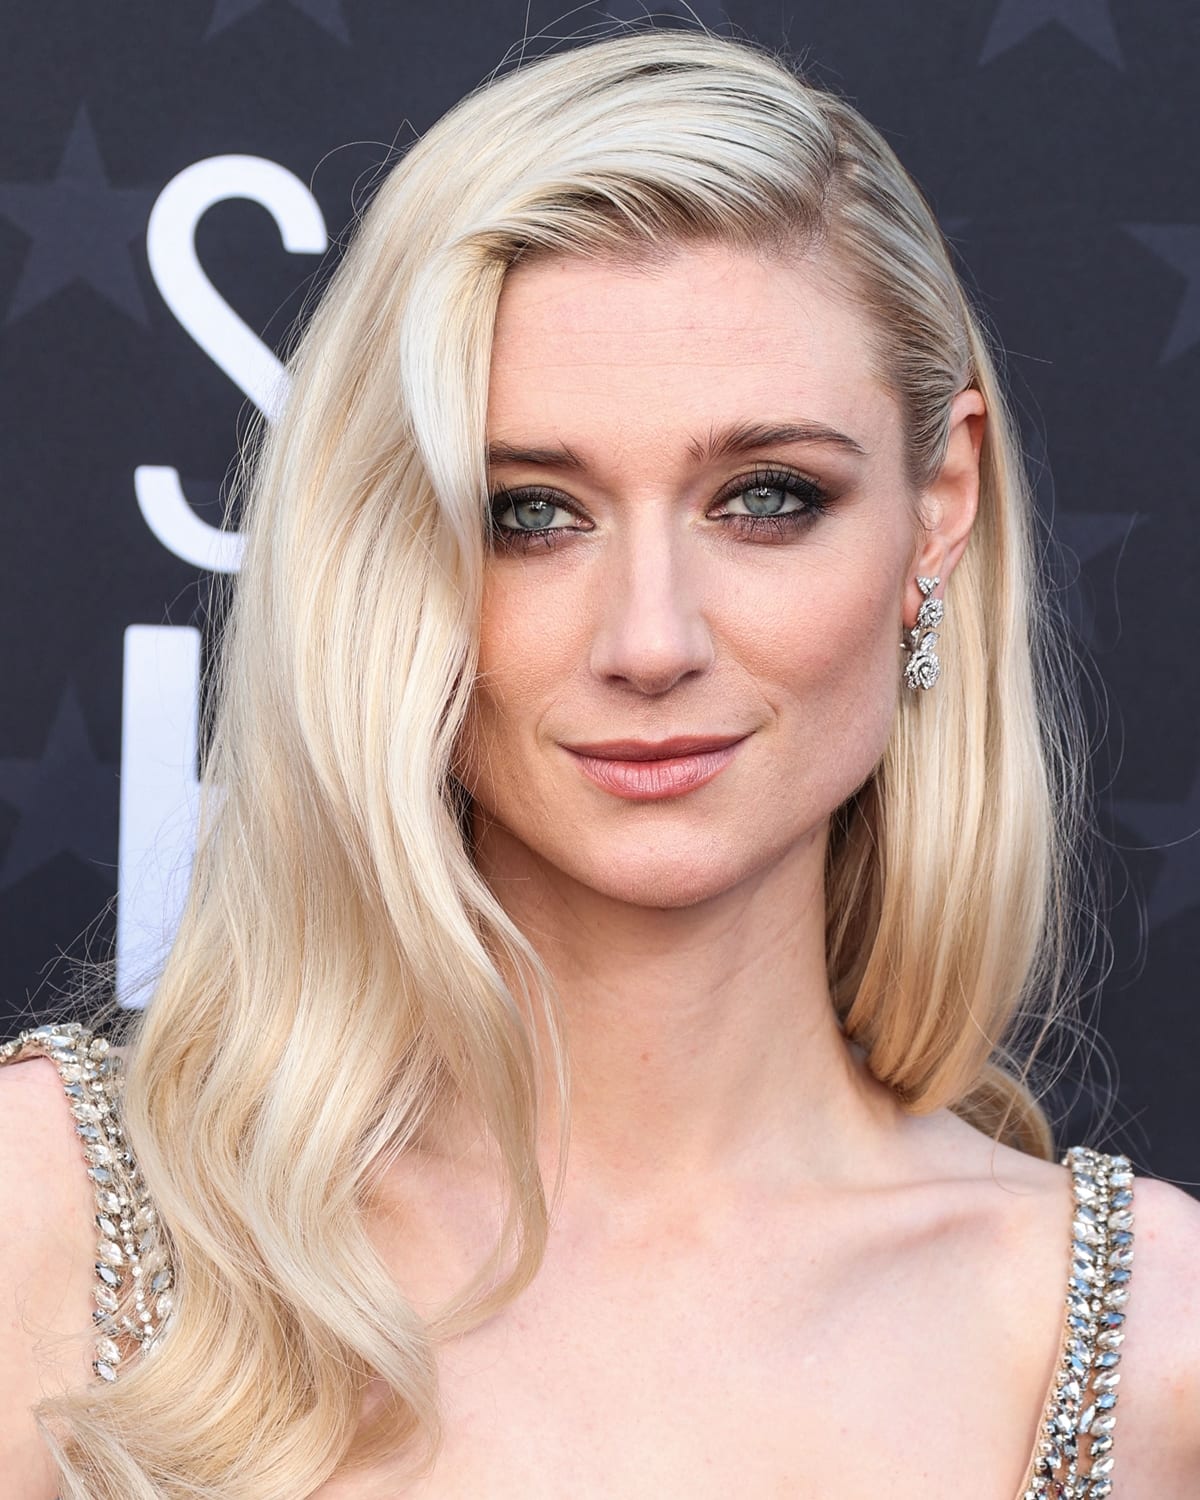 Elizabeth Debicki wore simple yet exquisite jewelry from Christian Dior, showcasing the Dior Large Rose Dior Bagatelle earrings, which added a touch of luxury to her outfit